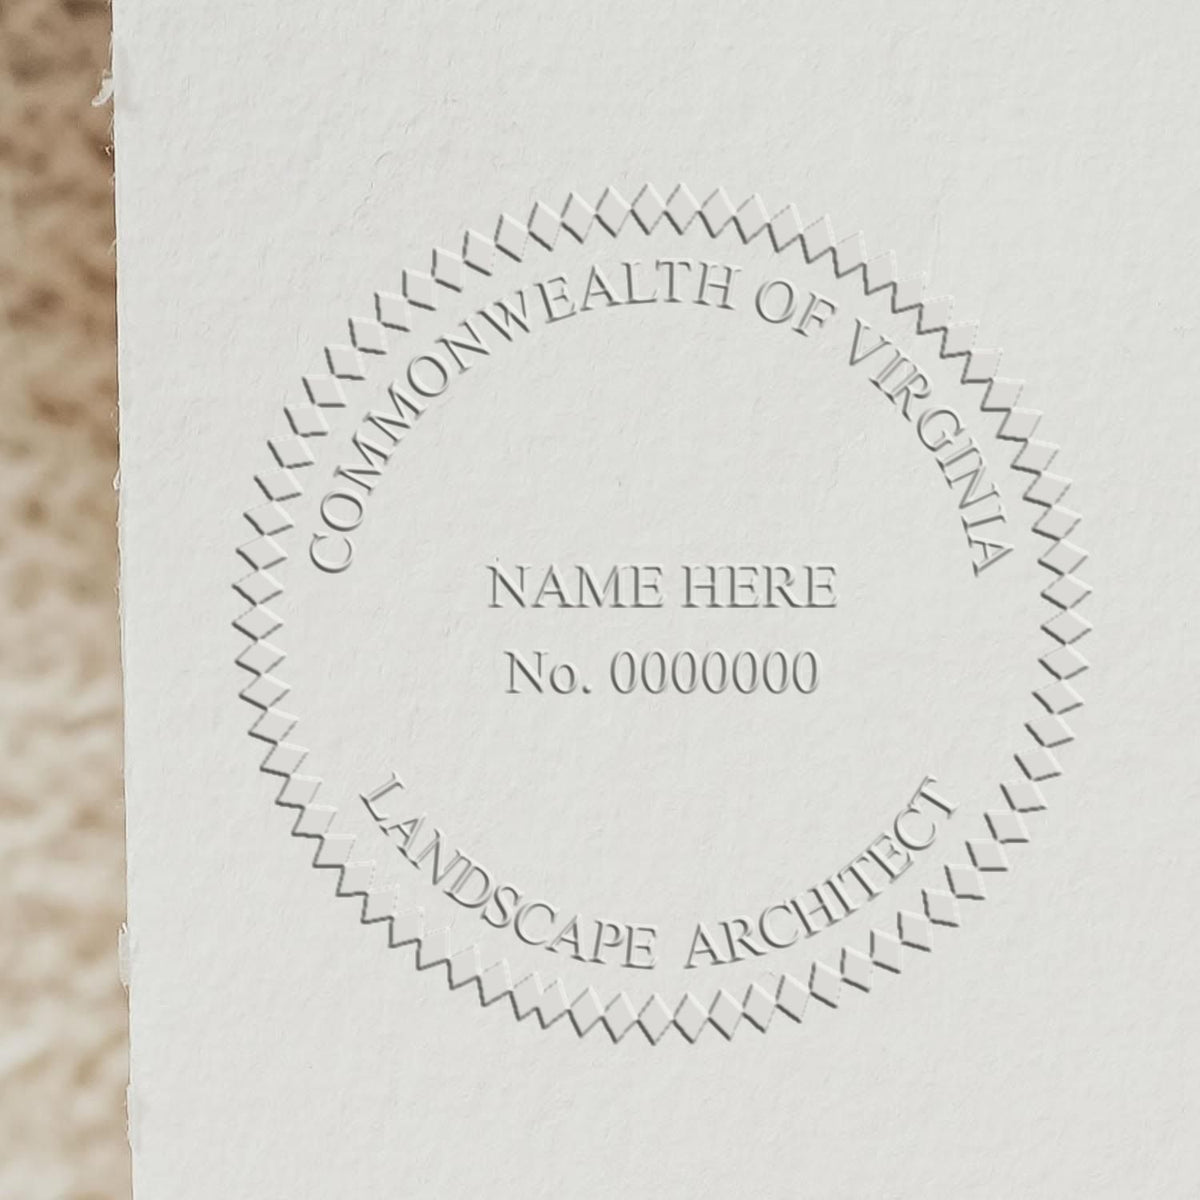 The Gift Virginia Landscape Architect Seal stamp impression comes to life with a crisp, detailed image stamped on paper - showcasing true professional quality.